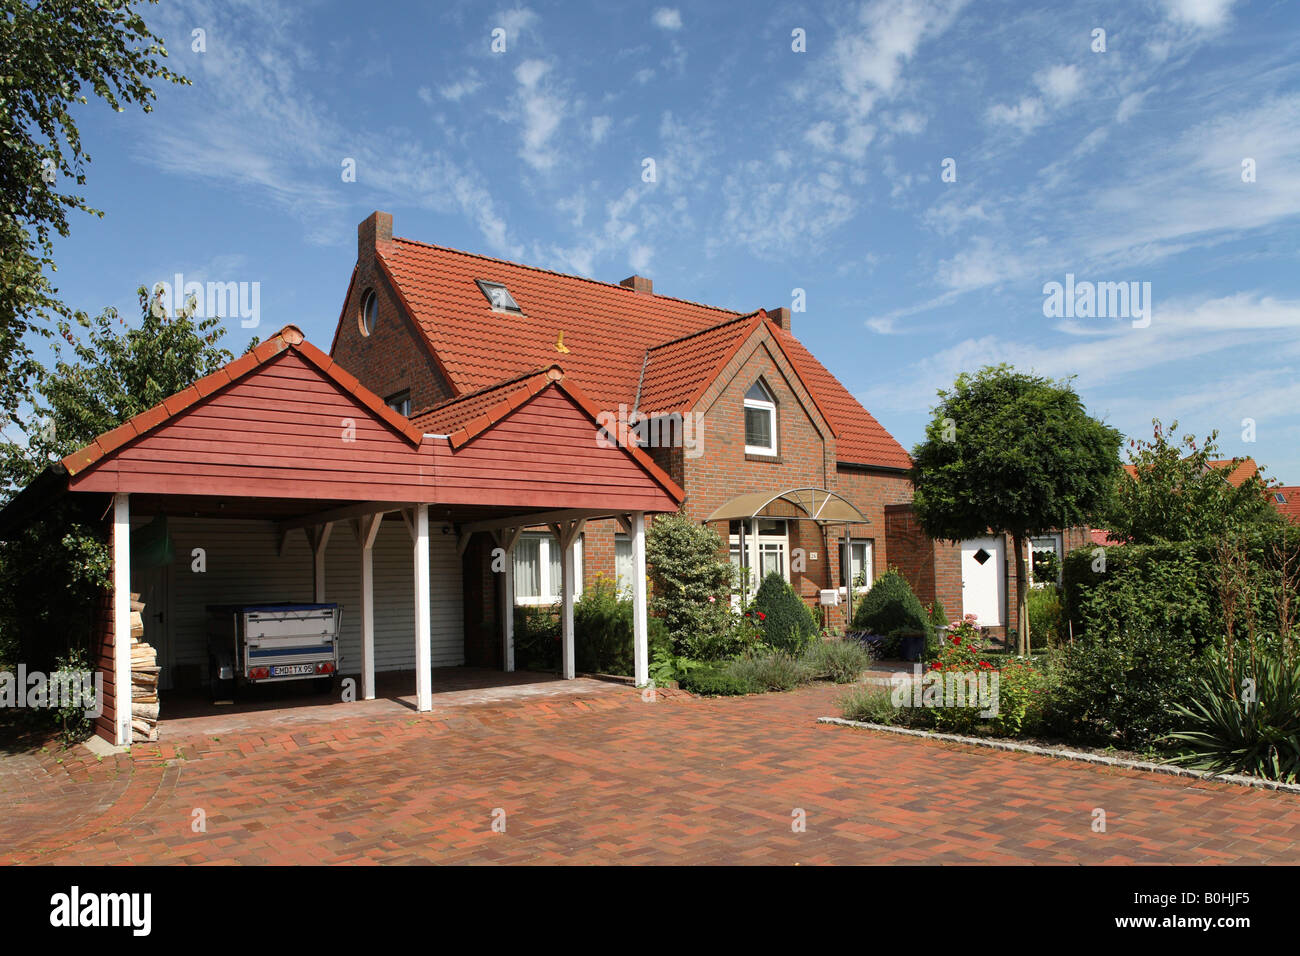 Single-family home, house in Wolthusen, Empden, Lower Saxony, Germany Stock Photo